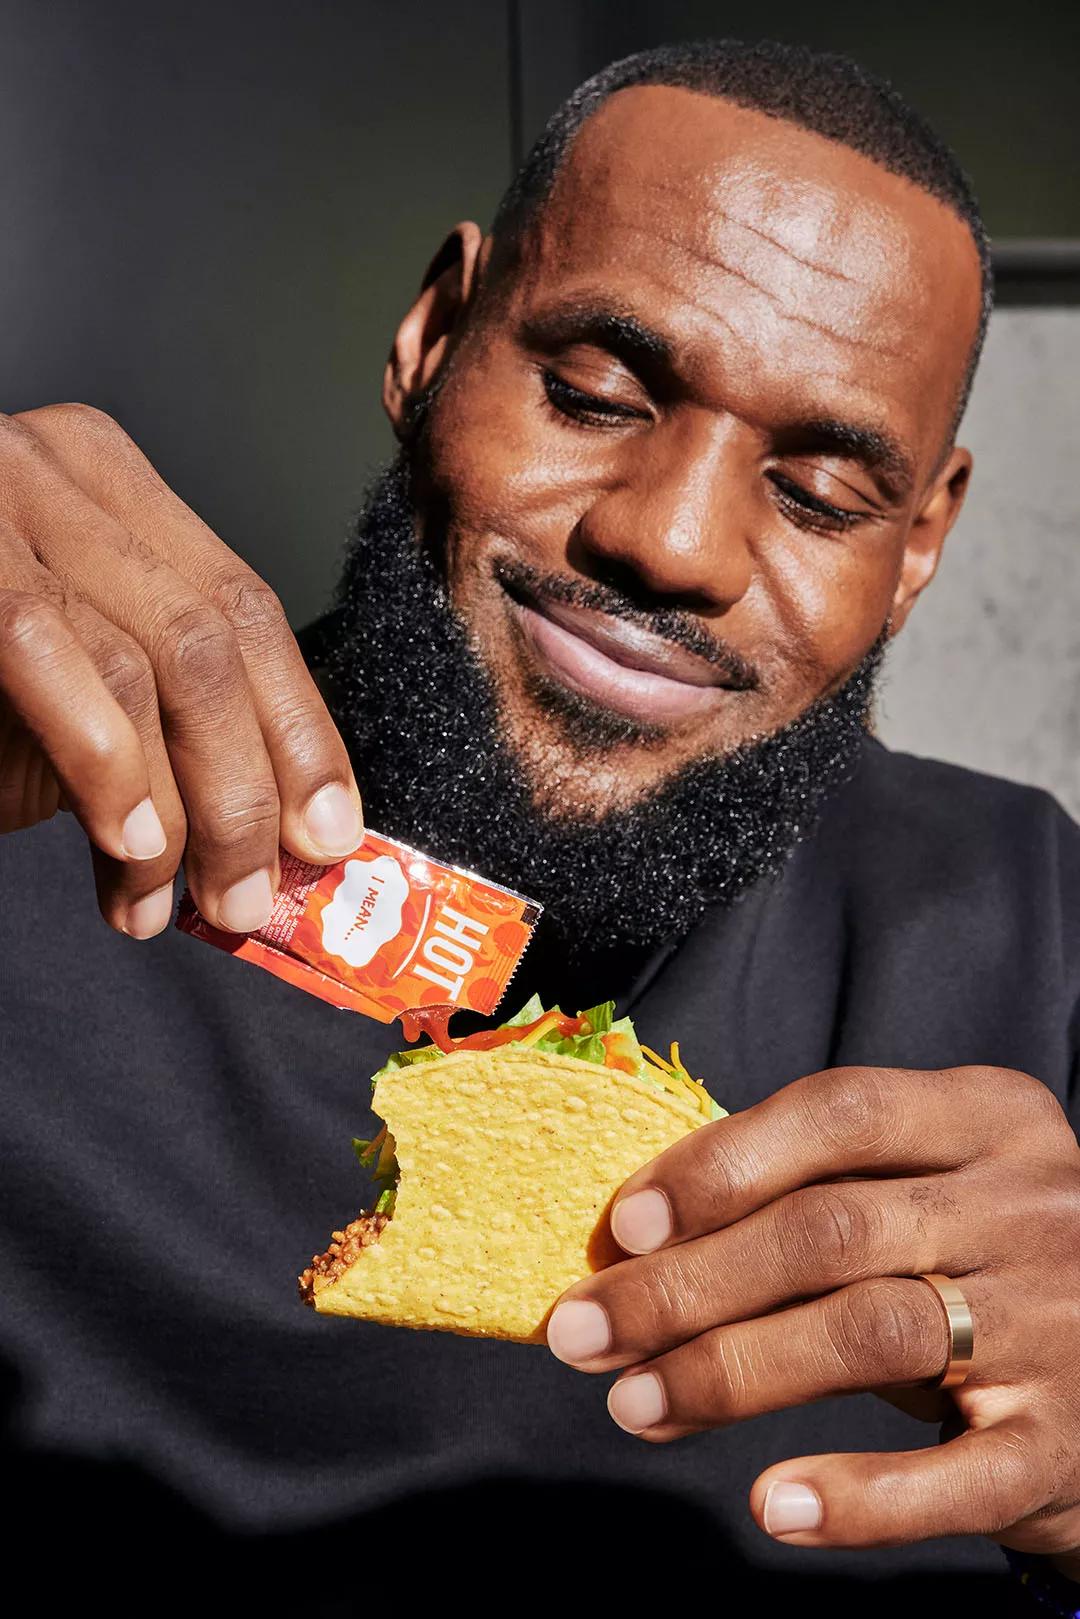 LeBron James Joins Taco Bell’s Effort To Free “Taco Tuesday” For Everyone